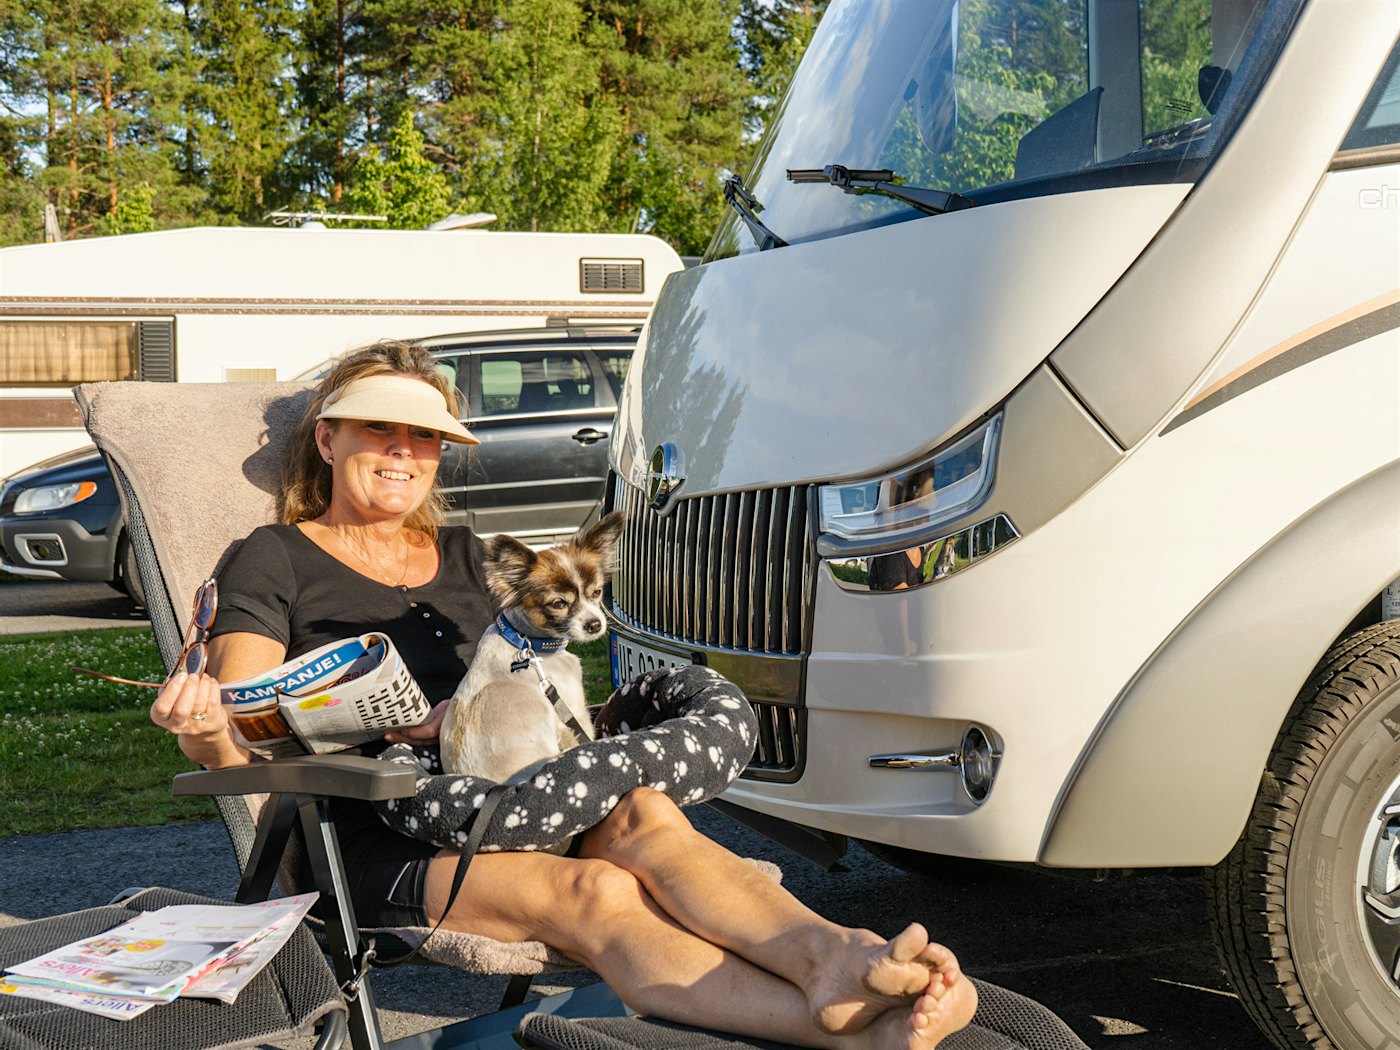 Lady reads a newspaper outside her motorhome with a dog on her lap. Photo